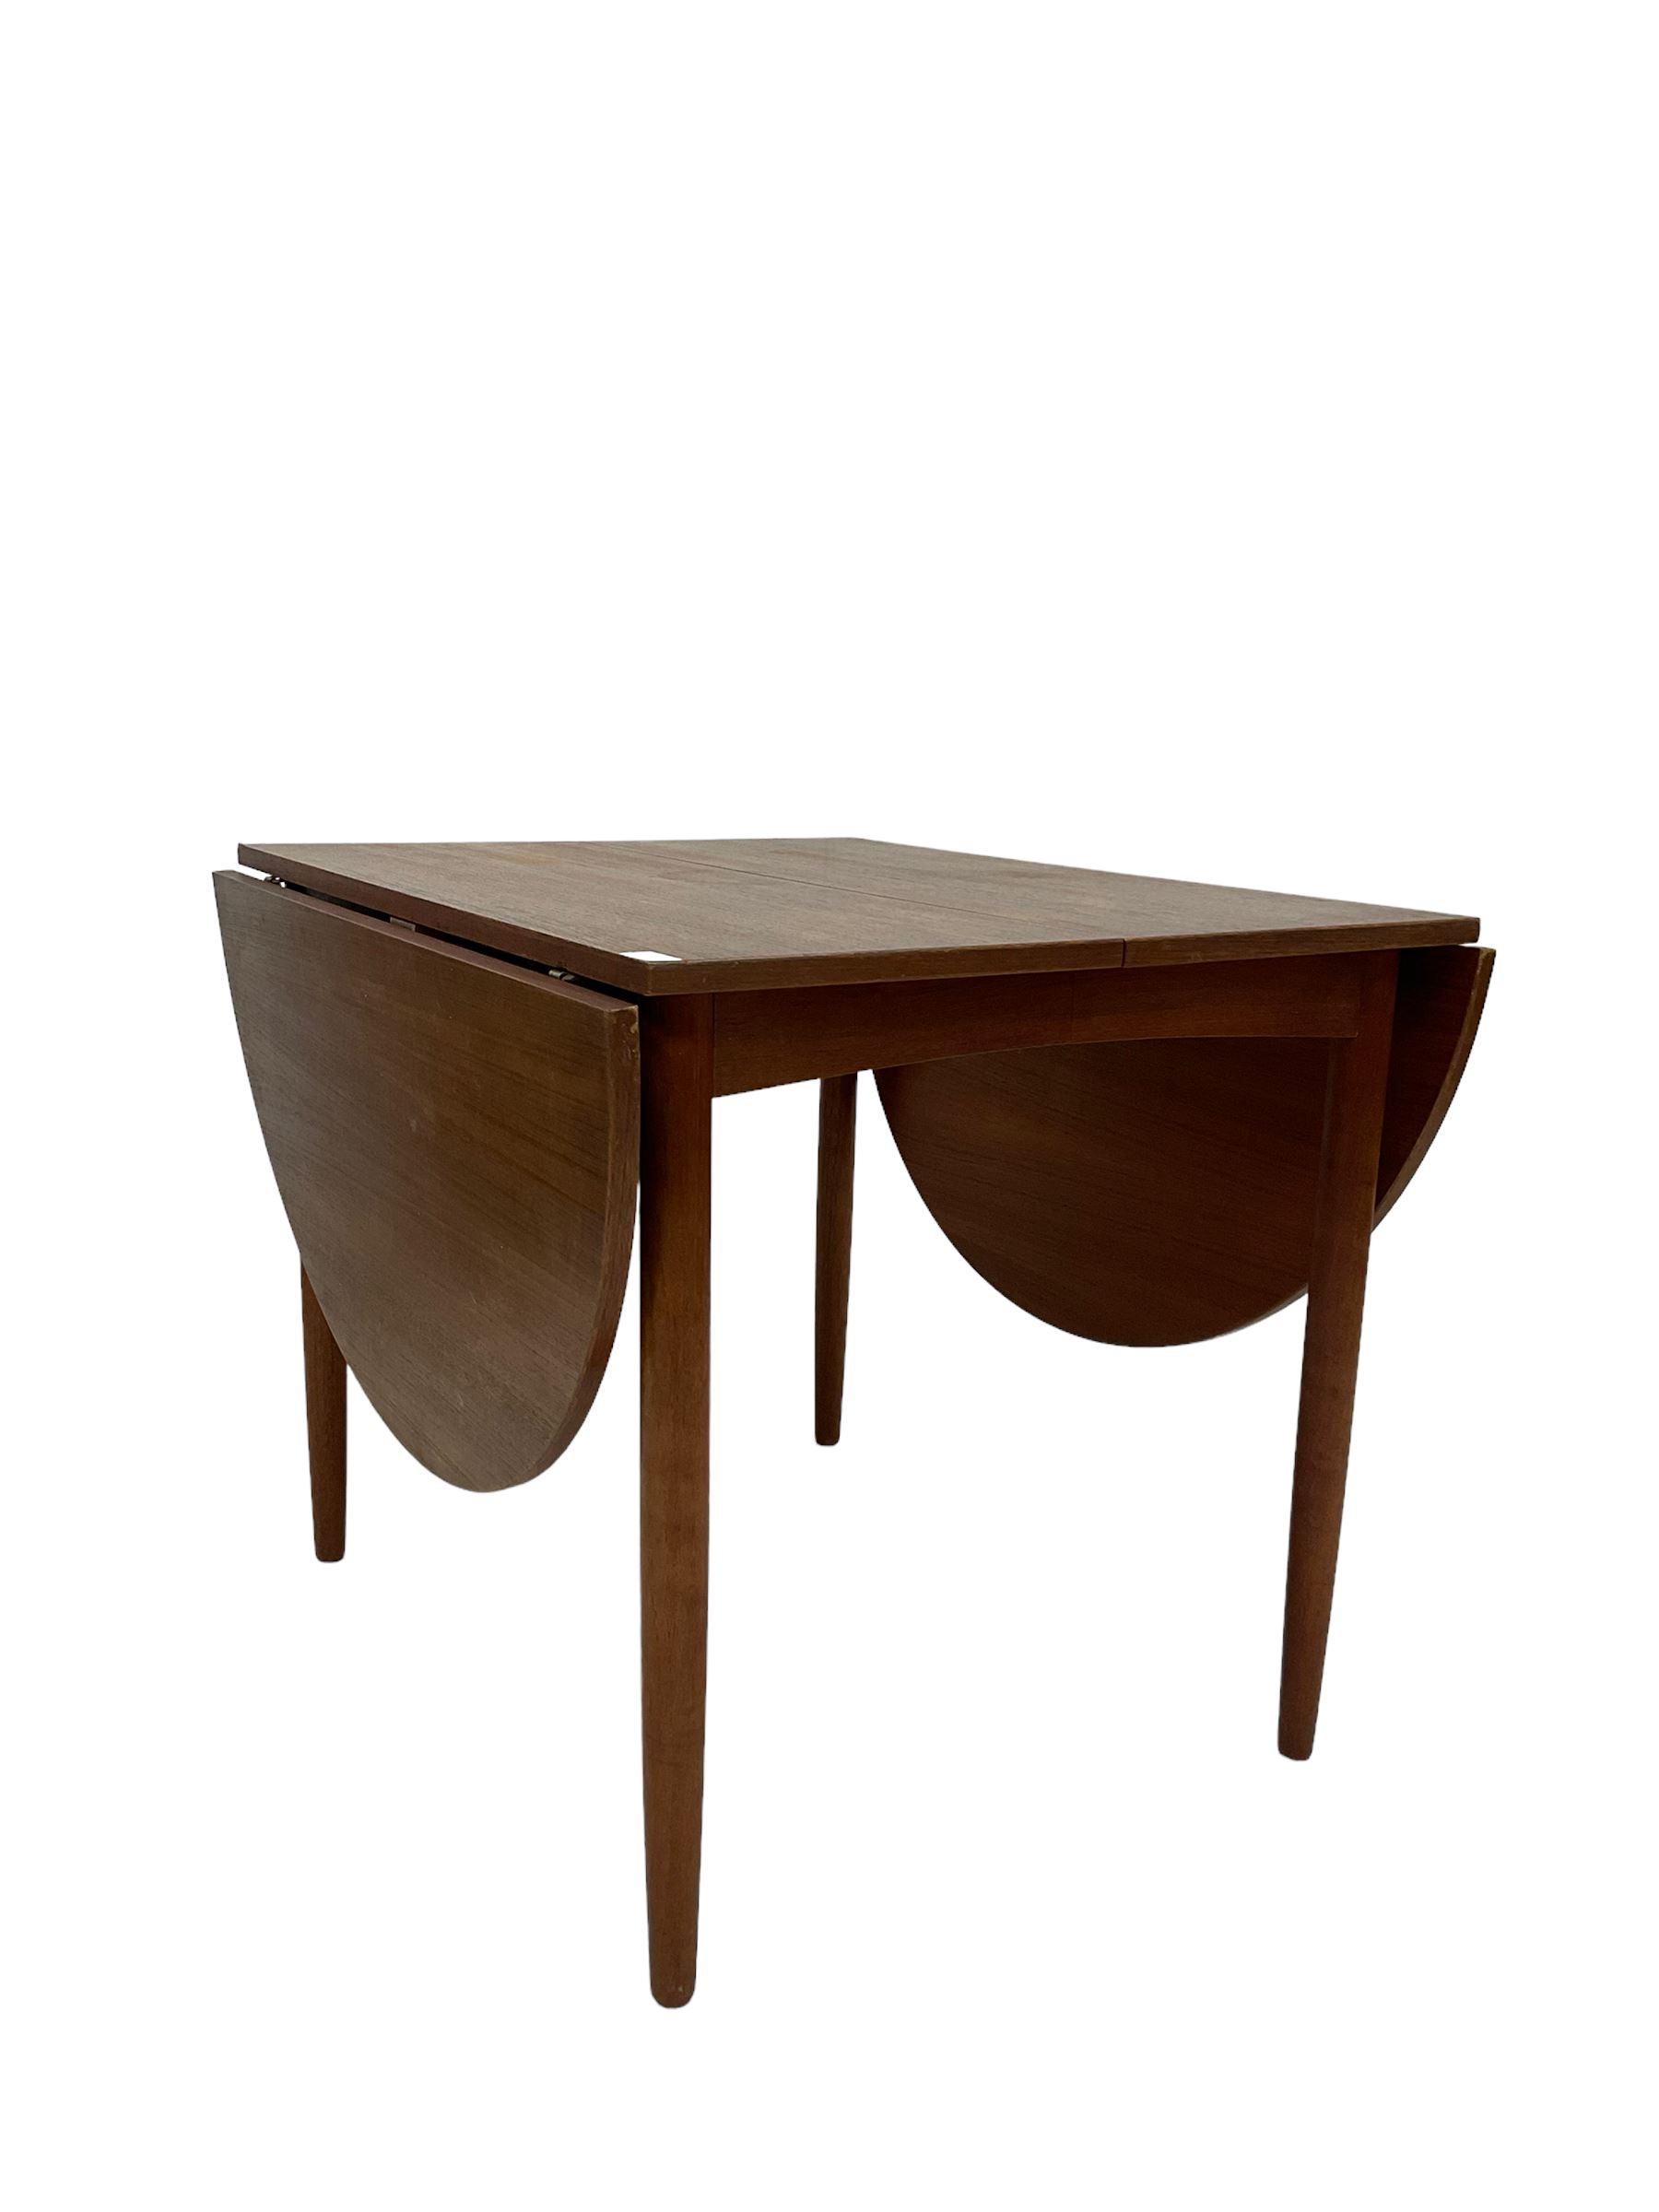 Nils Jonsson for Troeds - Pair of 20th century teak chairs by with upholstered seats - Image 7 of 7